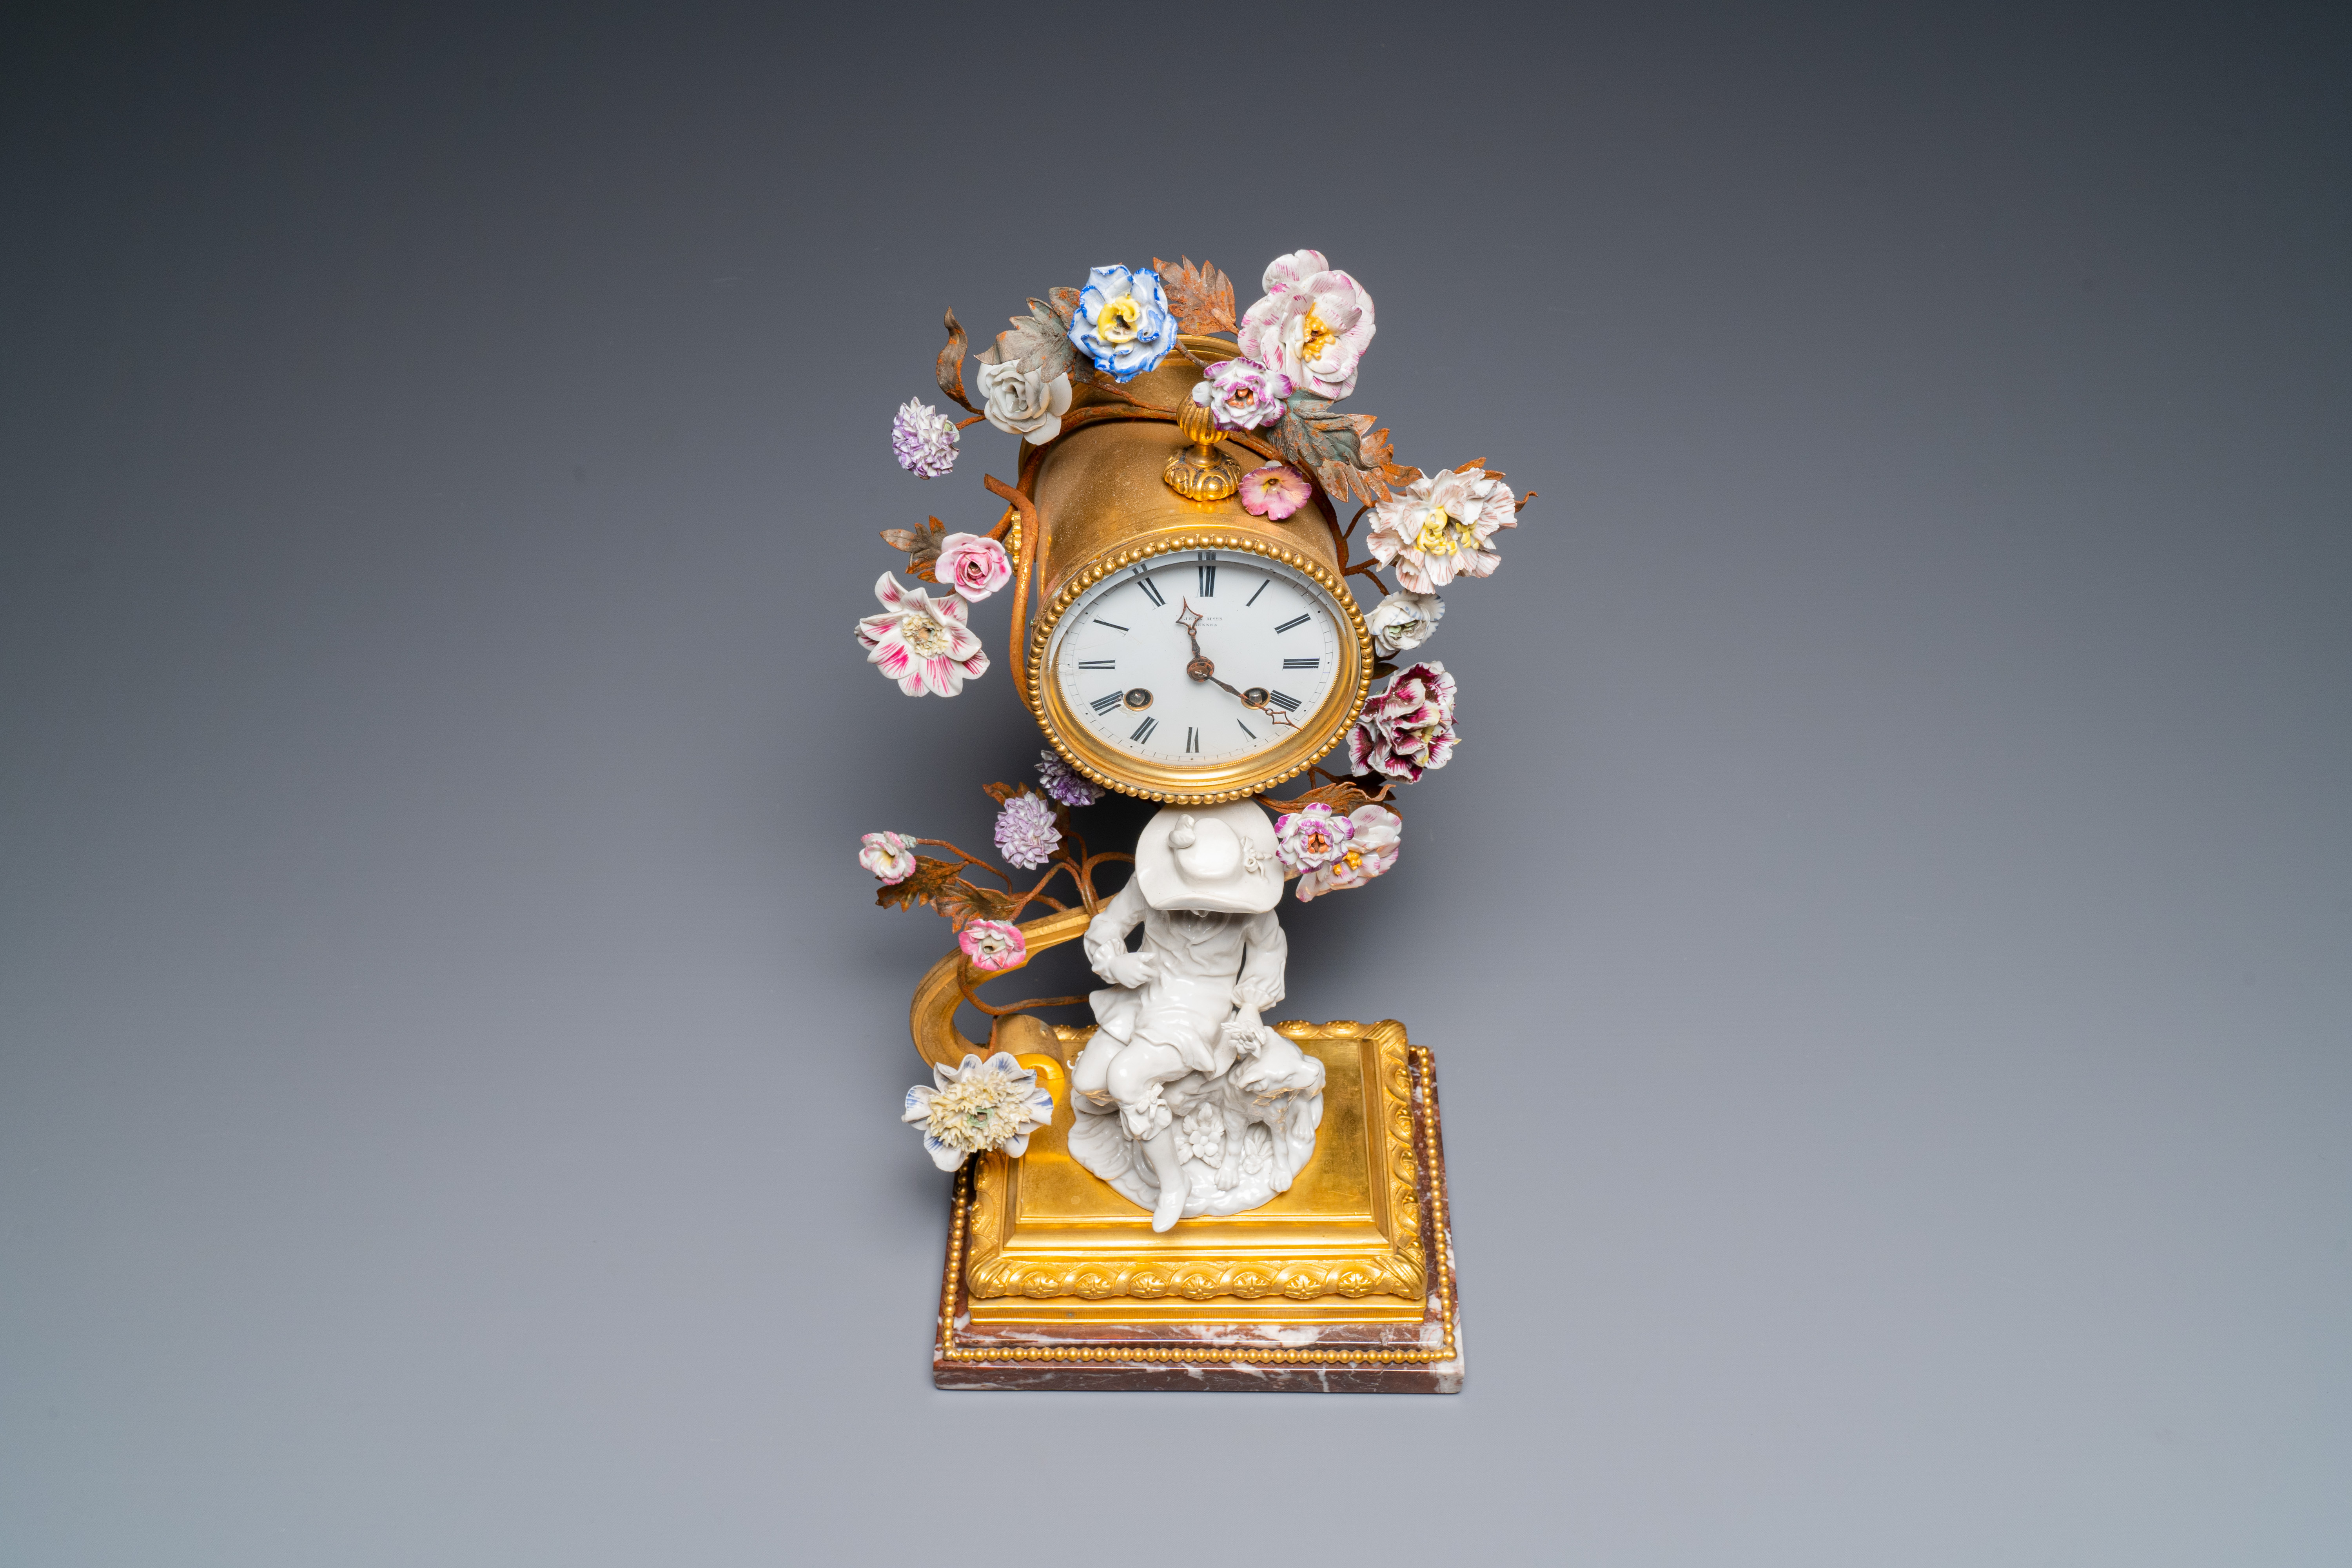 A French ormolu-mounted porcelain mantel clock, 18/19th C. - Image 17 of 28